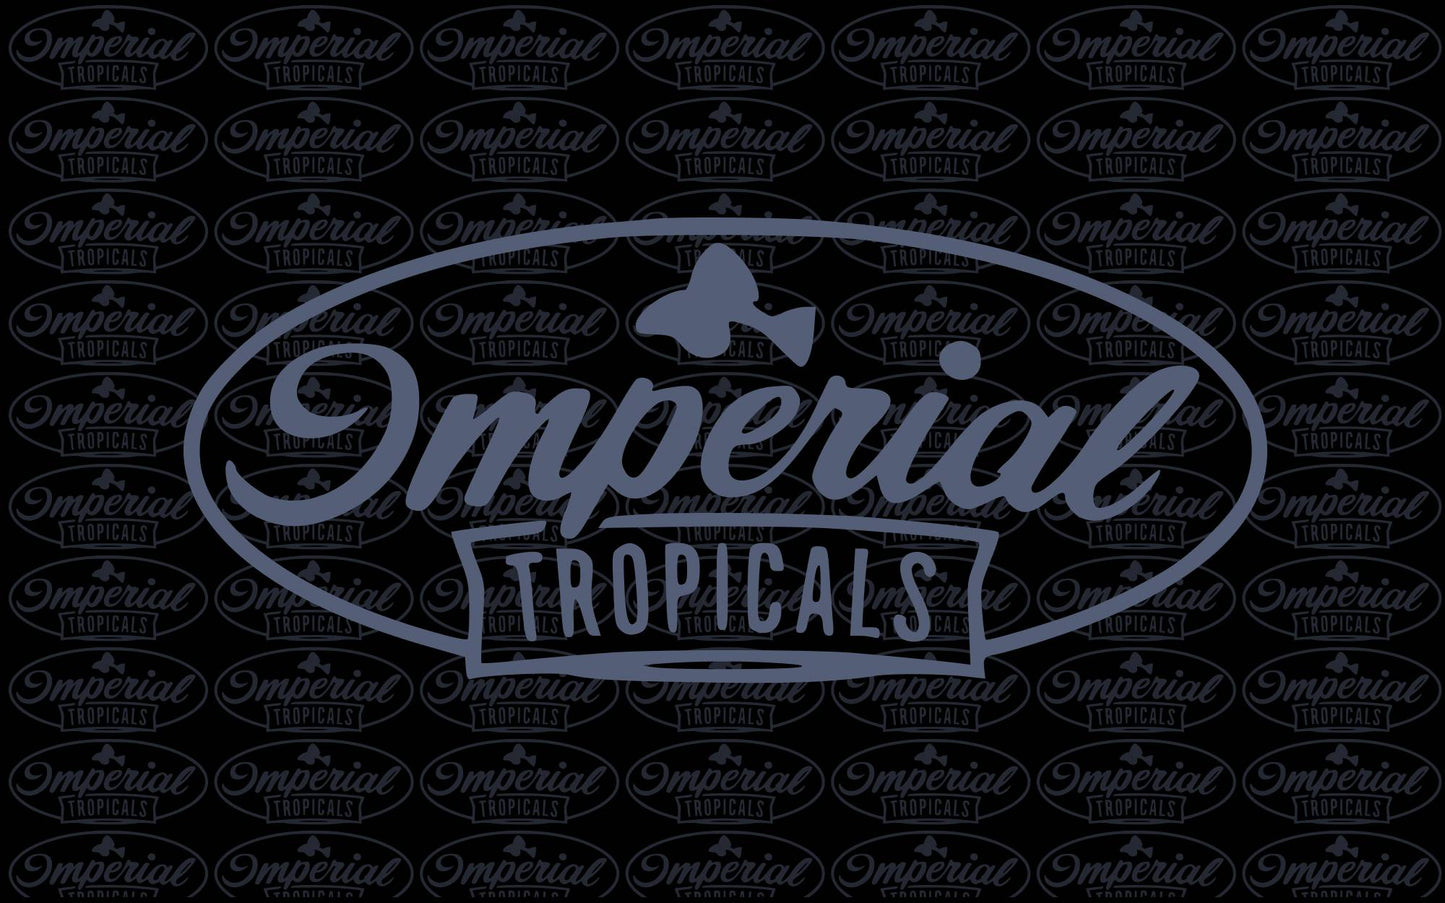 Imperial Tropicals Product Placeholder Logo